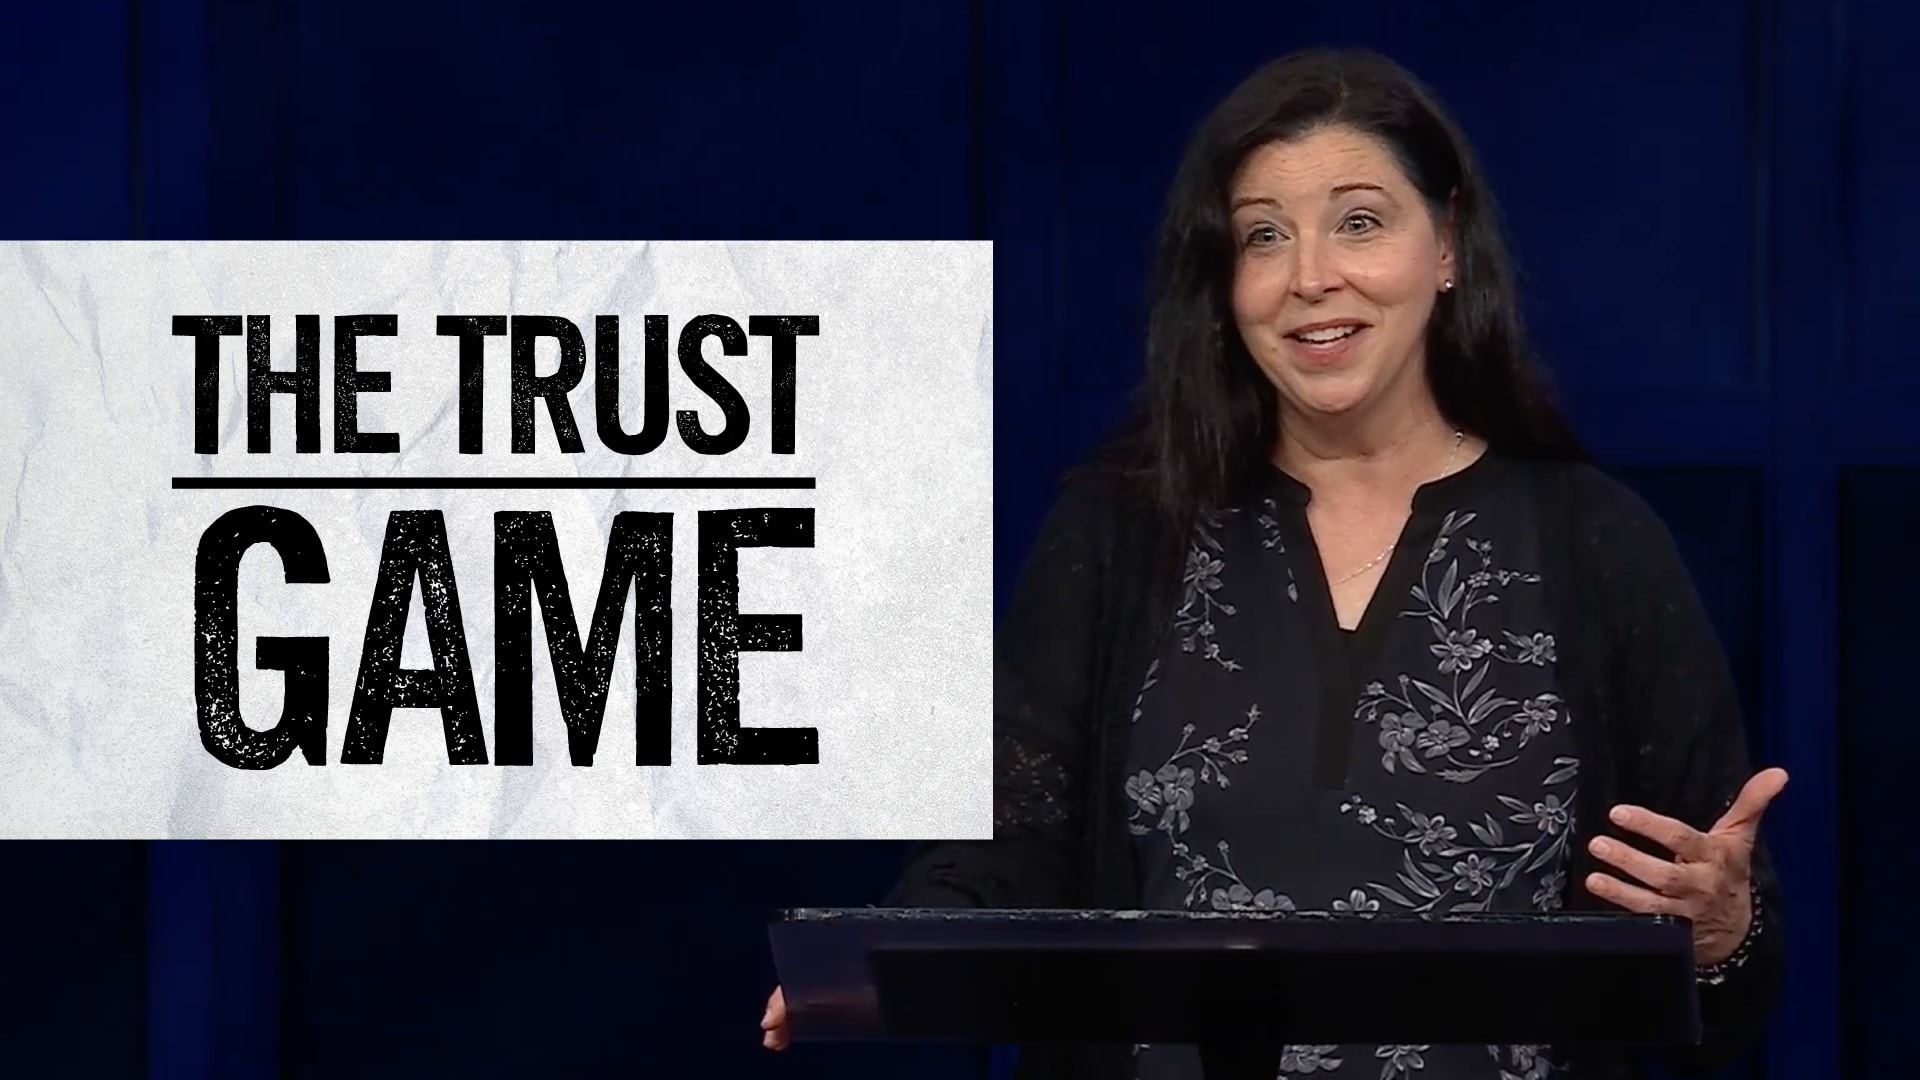 The Trust Game